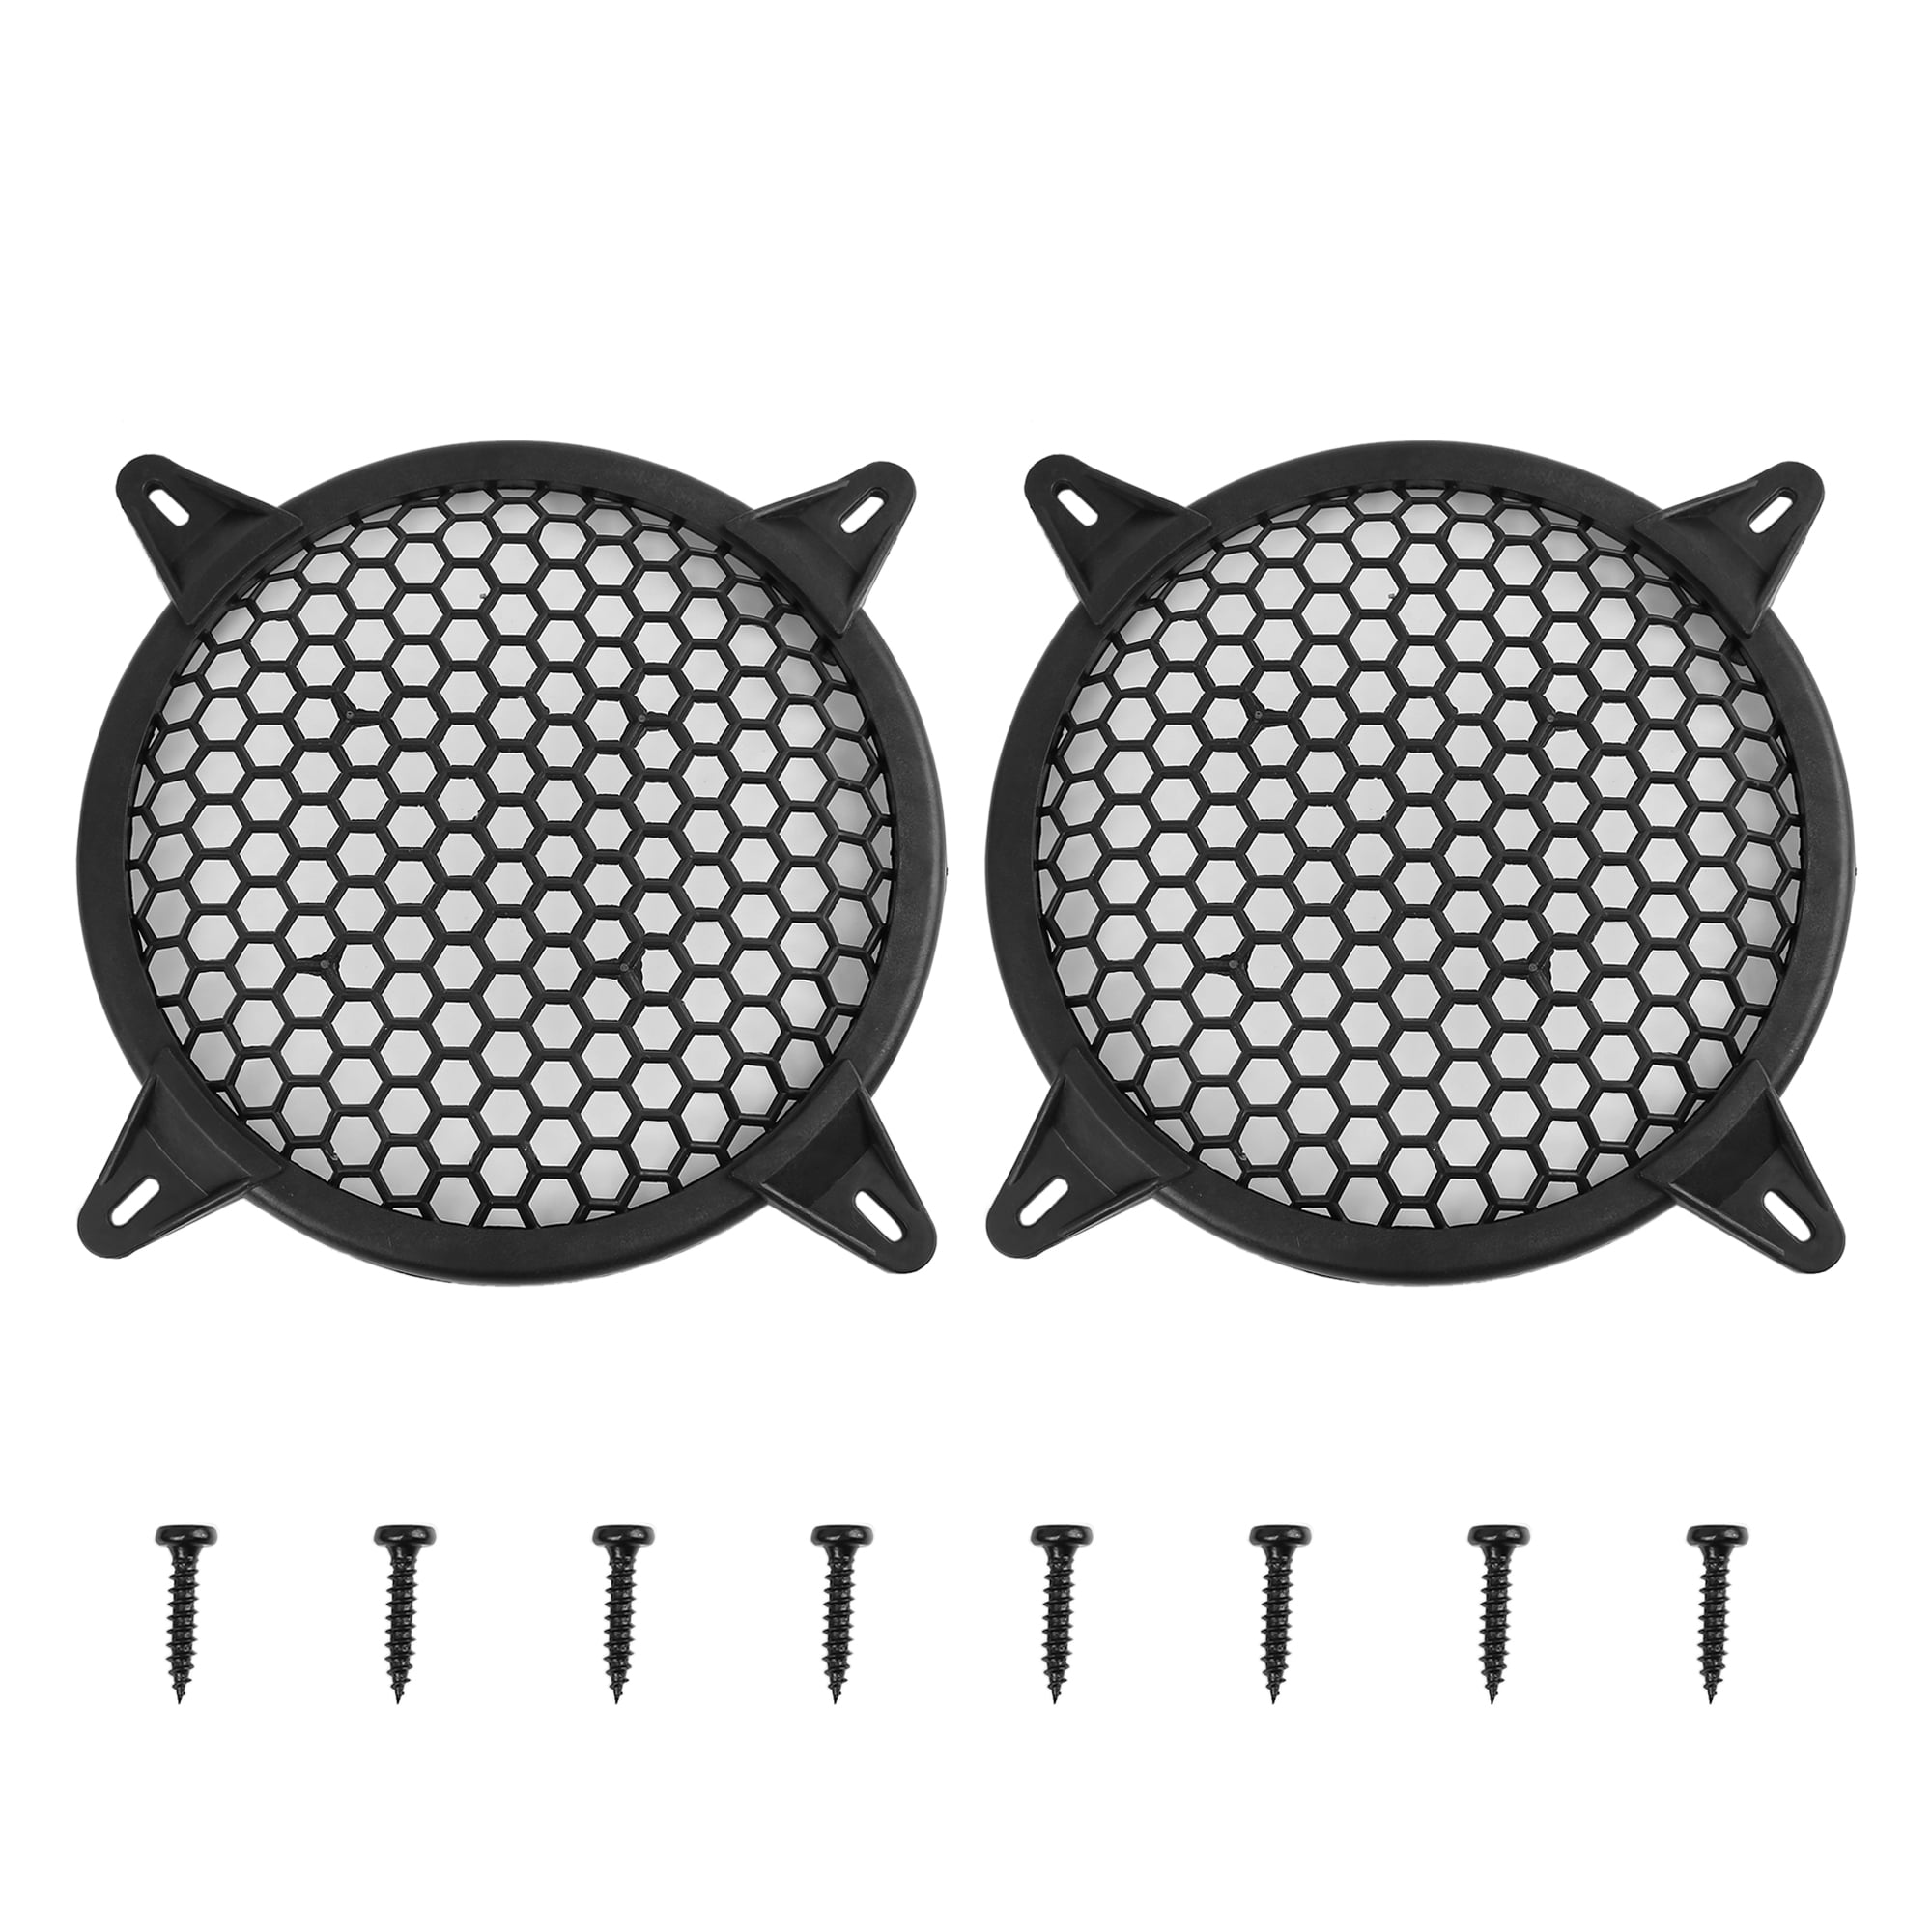 Black Mesh Cover Waffle Speaker Grill Protect Guard Car Audio G 